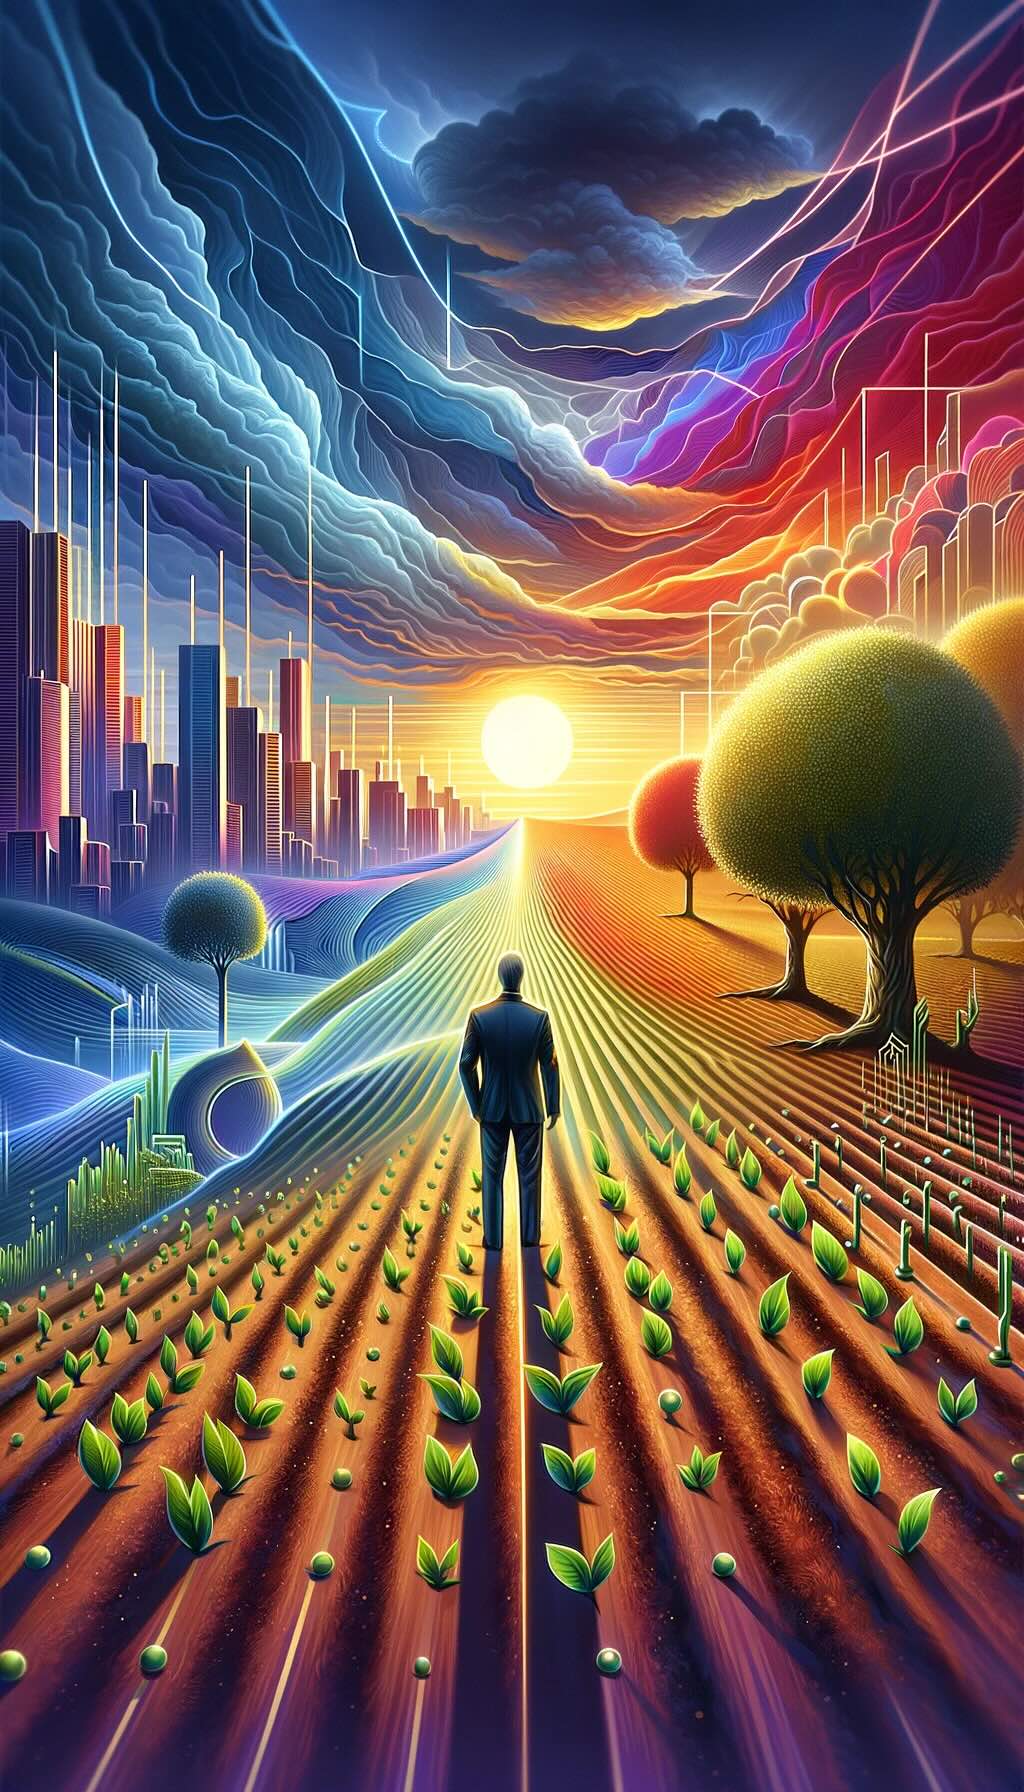 Patience in value investing, depicting an investor amid a landscape that evolves from barren to lush, symbolizing the growth journey of value investments. Holding a clock with slowly moving hands, the investor embodies the patience and long-term perspective essential to value investing. Seedlings around the investor gradually mature into robust trees, representing the potential for substantial returns over time. The changing skyline from dawn to dusk in the background further emphasizes the long-term horizon necessary for value investing success, encouraging viewers to focus on underlying value and long-term potential rather than short-term market movements.